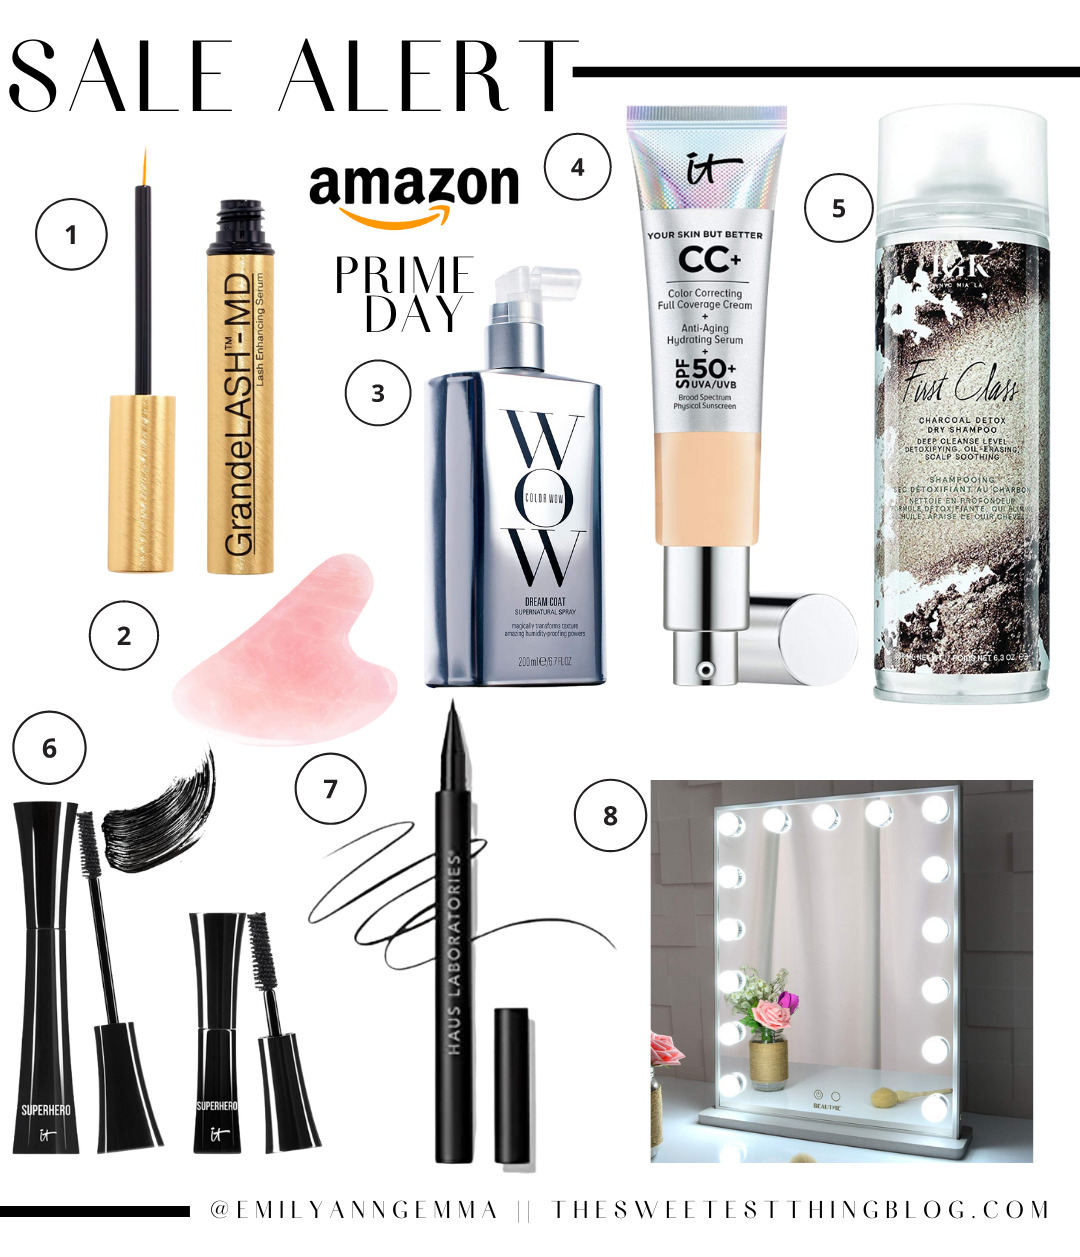 Amazon Prime Day by popular US life and Style blog, The Sweetest Thing: collage image of Grande LASH-MD, WOW face cream, it Cosmetics cc cream, First Class charcoal detox, rose quartz face stone, it Cosmetics super hero mascara, Haus Laboratories eye liner, and lighted makeup mirror. 